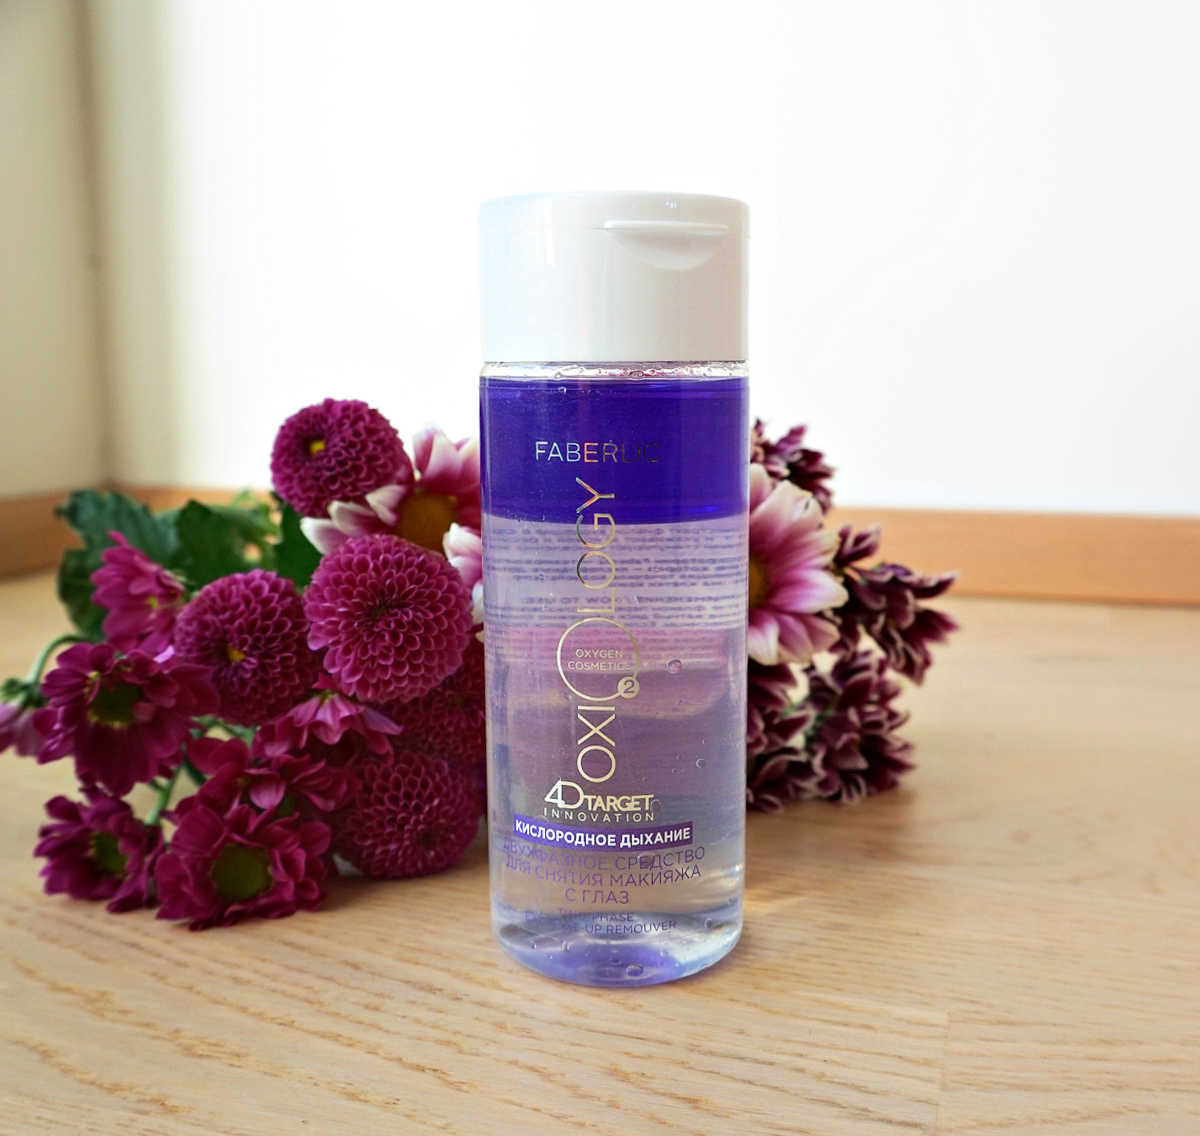 Faberlic Two-Phase Eye Makeup Remover review